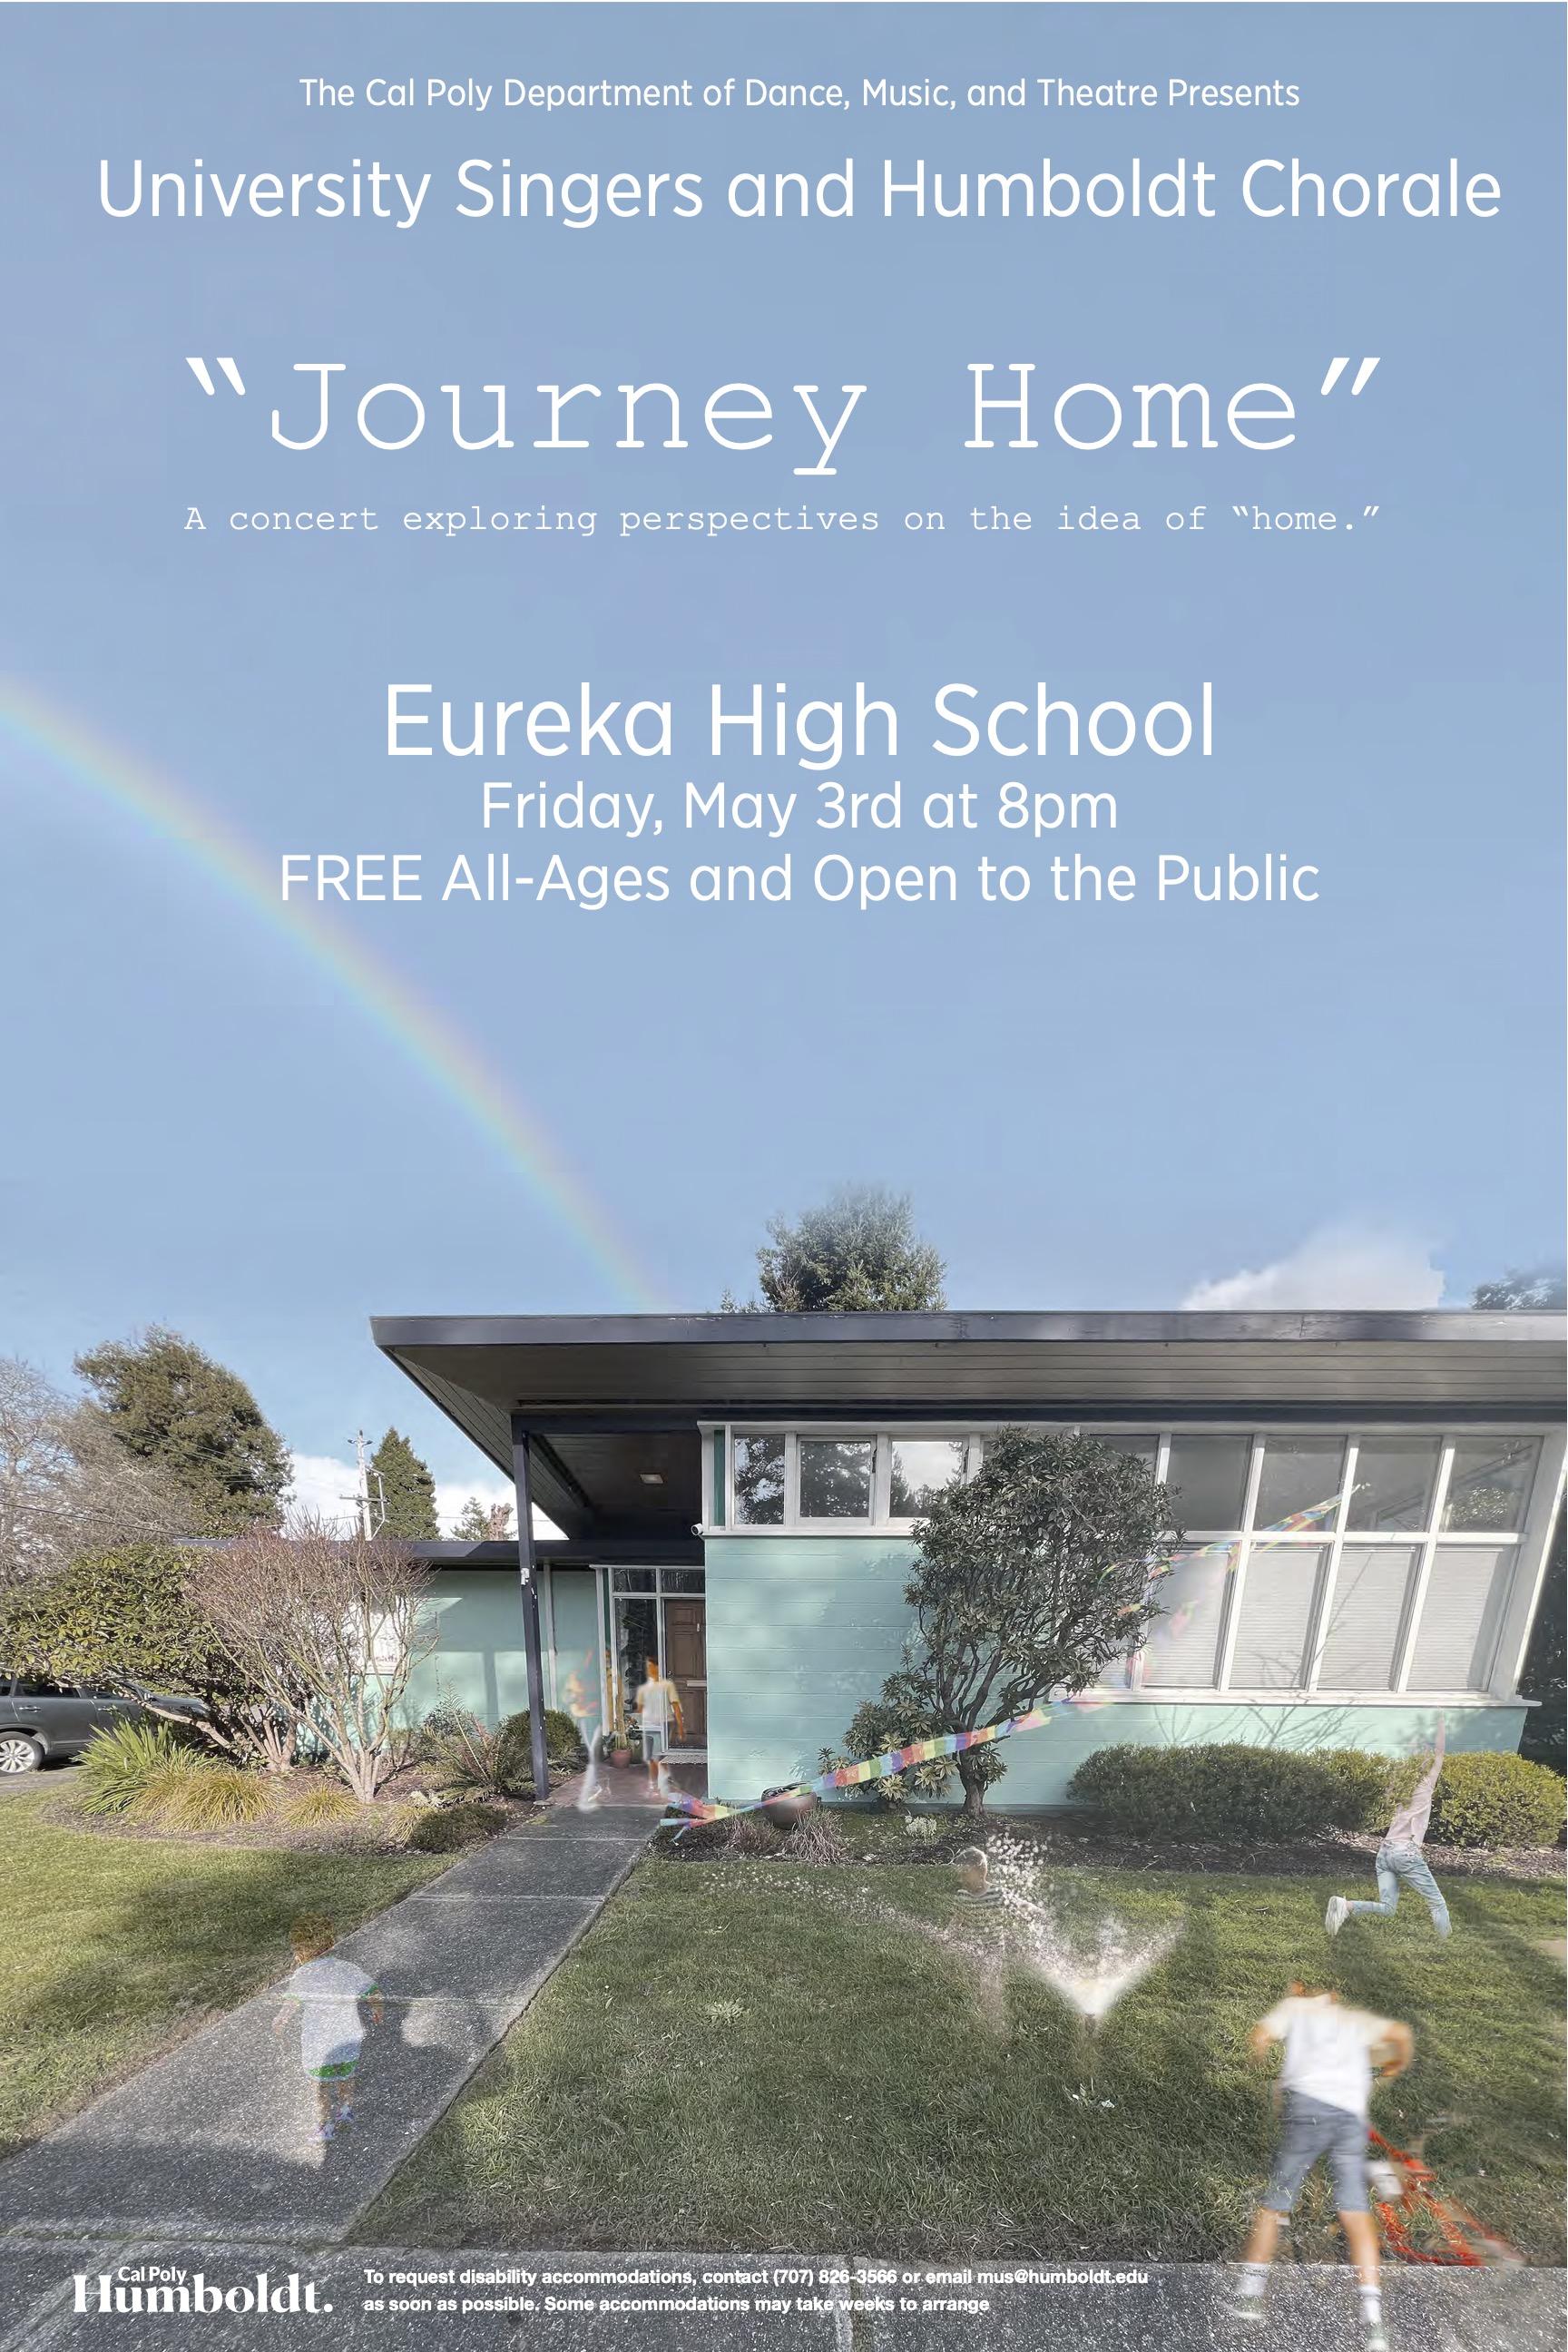 University Singers & Humboldt Chorale - "Journey Home" - Friday May 3rd - Free for all ages